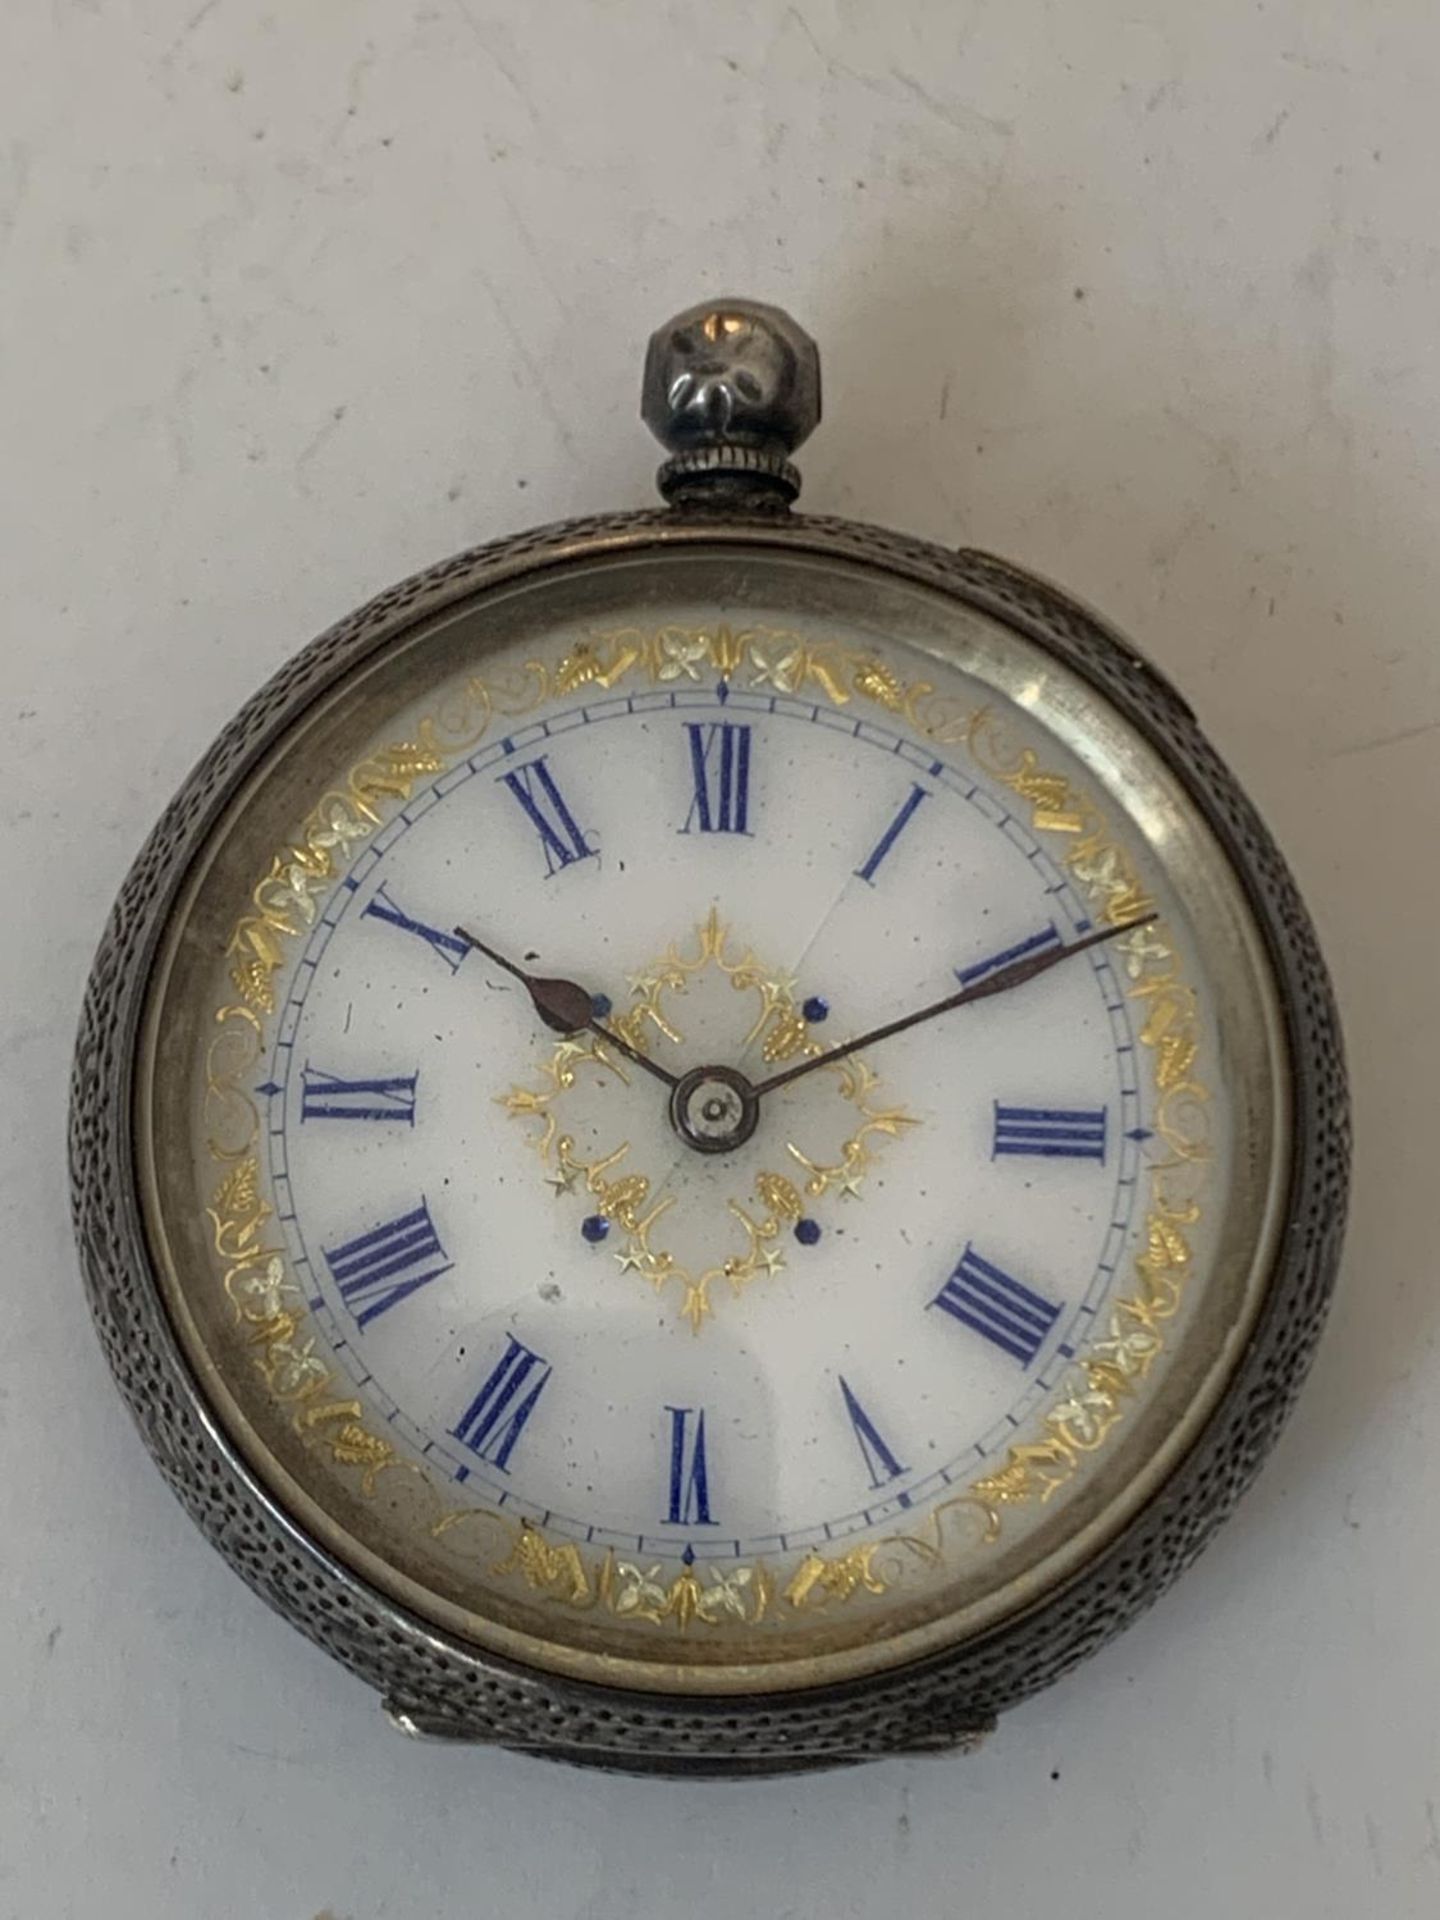 A MARKED 935 SILVER POCKET WATCH WITH WHITE ENAMEL AND FLORAL DECORATION FACE AND ROMAN NUMERALS (